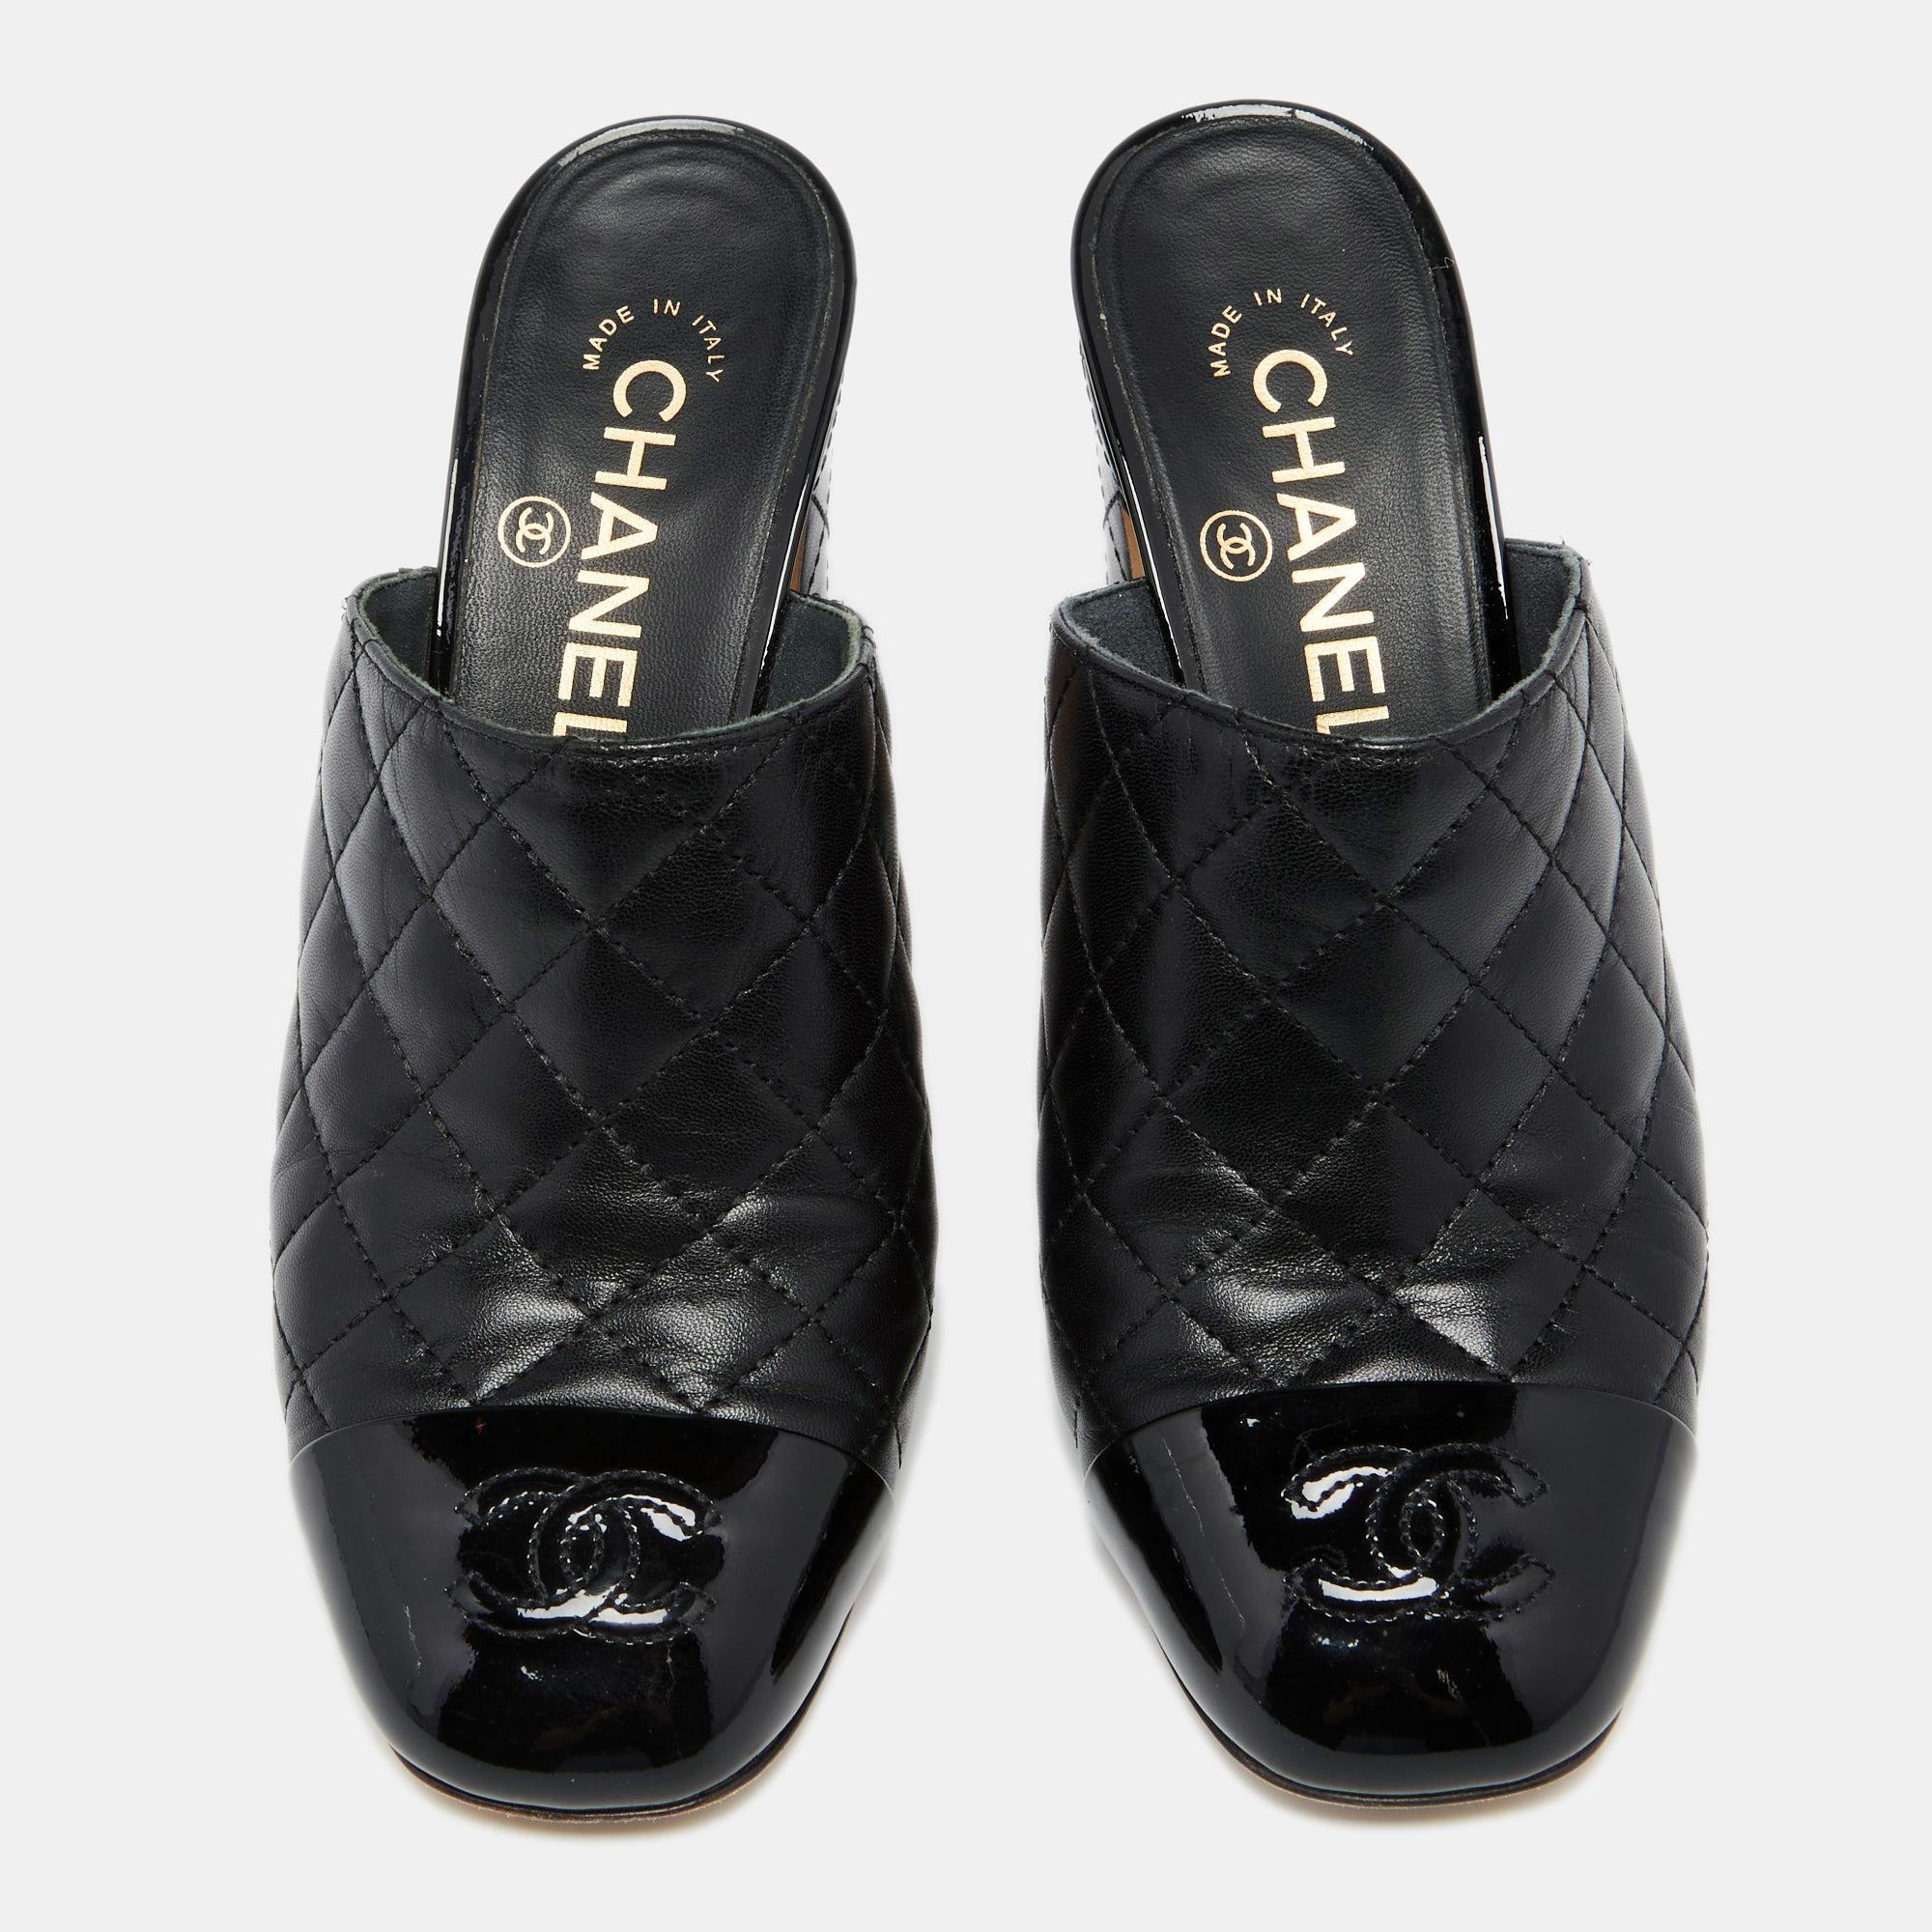 Enriched with exquisite details, these Chanel mules are the epitome of sophistication and grace. The 8cm heels of this pair will reflect luxury in every step. Created from quilted leather and patent leather, the 'CC' logo on the cap toes make these